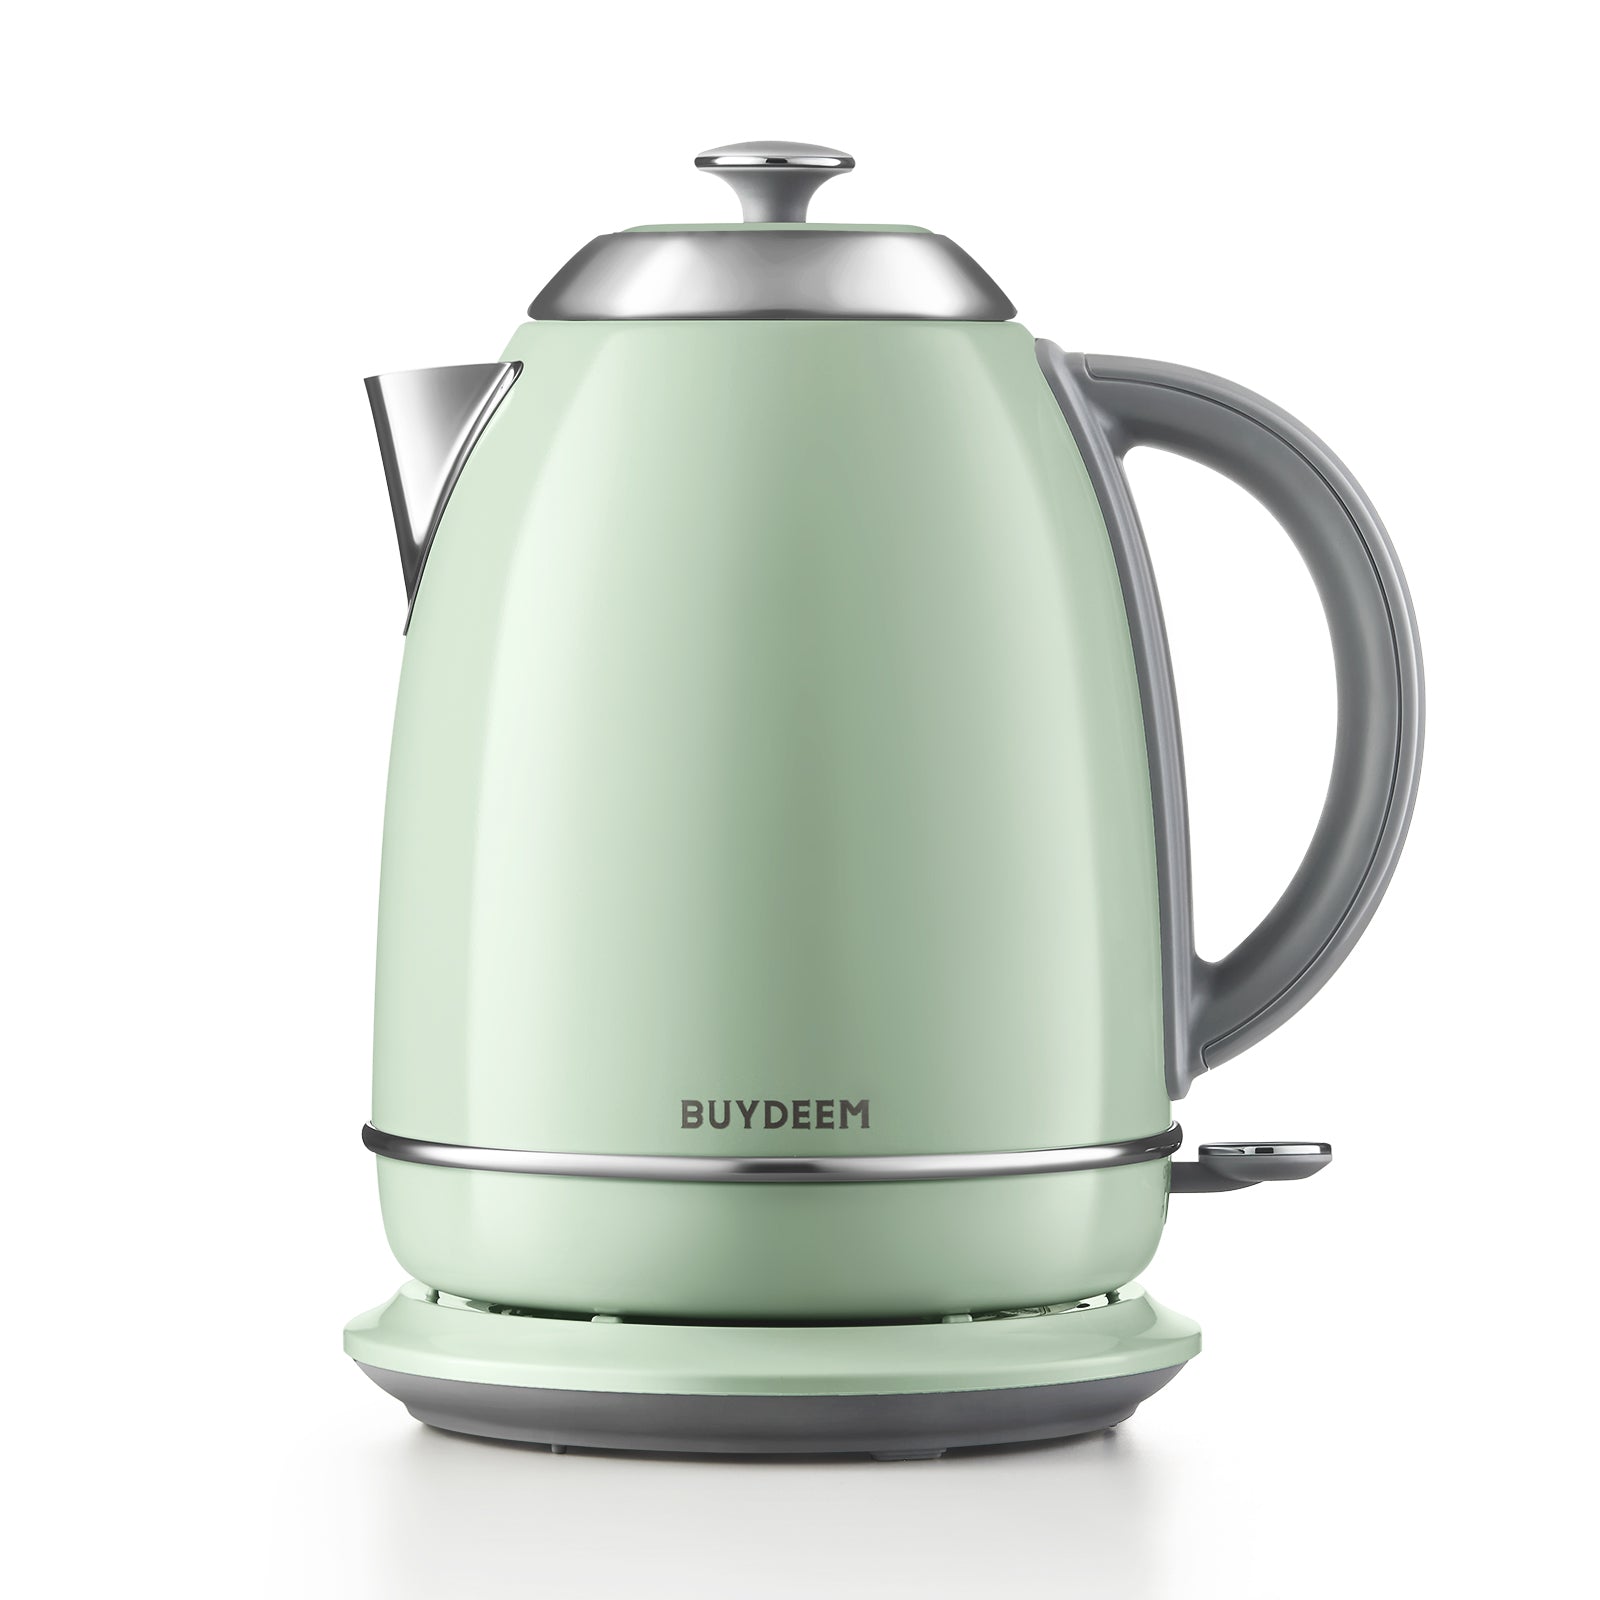 Buydeem: How to take good care of your Kettle Cooker?